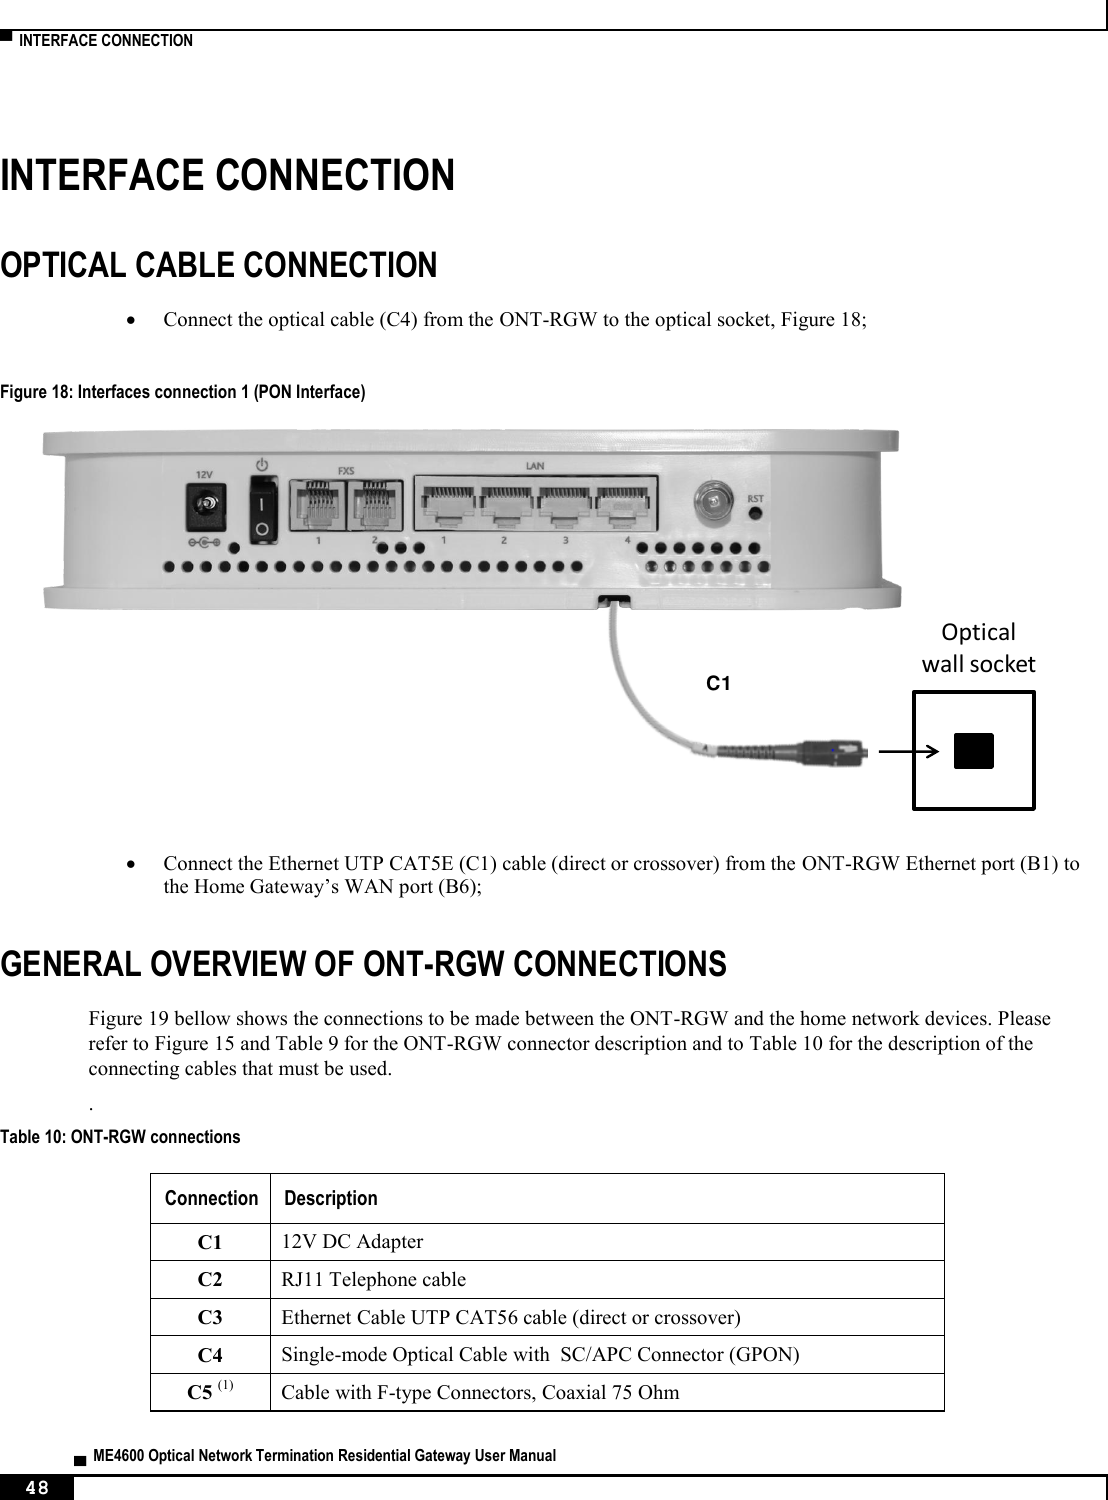  ▀  INTERFACE CONNECTION   ▄  ME4600 Optical Network Termination Residential Gateway User Manual 48    INTERFACE CONNECTION OPTICAL CABLE CONNECTION  Connect the optical cable (C4) from the ONT-RGW to the optical socket, Figure 18;  Figure 18: Interfaces connection 1 (PON Interface)    Connect the Ethernet UTP CAT5E (C1) cable (direct or crossover) from the ONT-RGW Ethernet port (B1) to the Home Gateway’s WAN port (B6); GENERAL OVERVIEW OF ONT-RGW CONNECTIONS Figure 19 bellow shows the connections to be made between the ONT-RGW and the home network devices. Please refer to Figure 15 and Table 9 for the ONT-RGW connector description and to Table 10 for the description of the connecting cables that must be used. . Table 10: ONT-RGW connections Connection Description C1 12V DC Adapter C2 RJ11 Telephone cable  C3 Ethernet Cable UTP CAT56 cable (direct or crossover) C4 Single-mode Optical Cable with  SC/APC Connector (GPON)  C5 (1) Cable with F-type Connectors, Coaxial 75 Ohm Optical wall socketC1